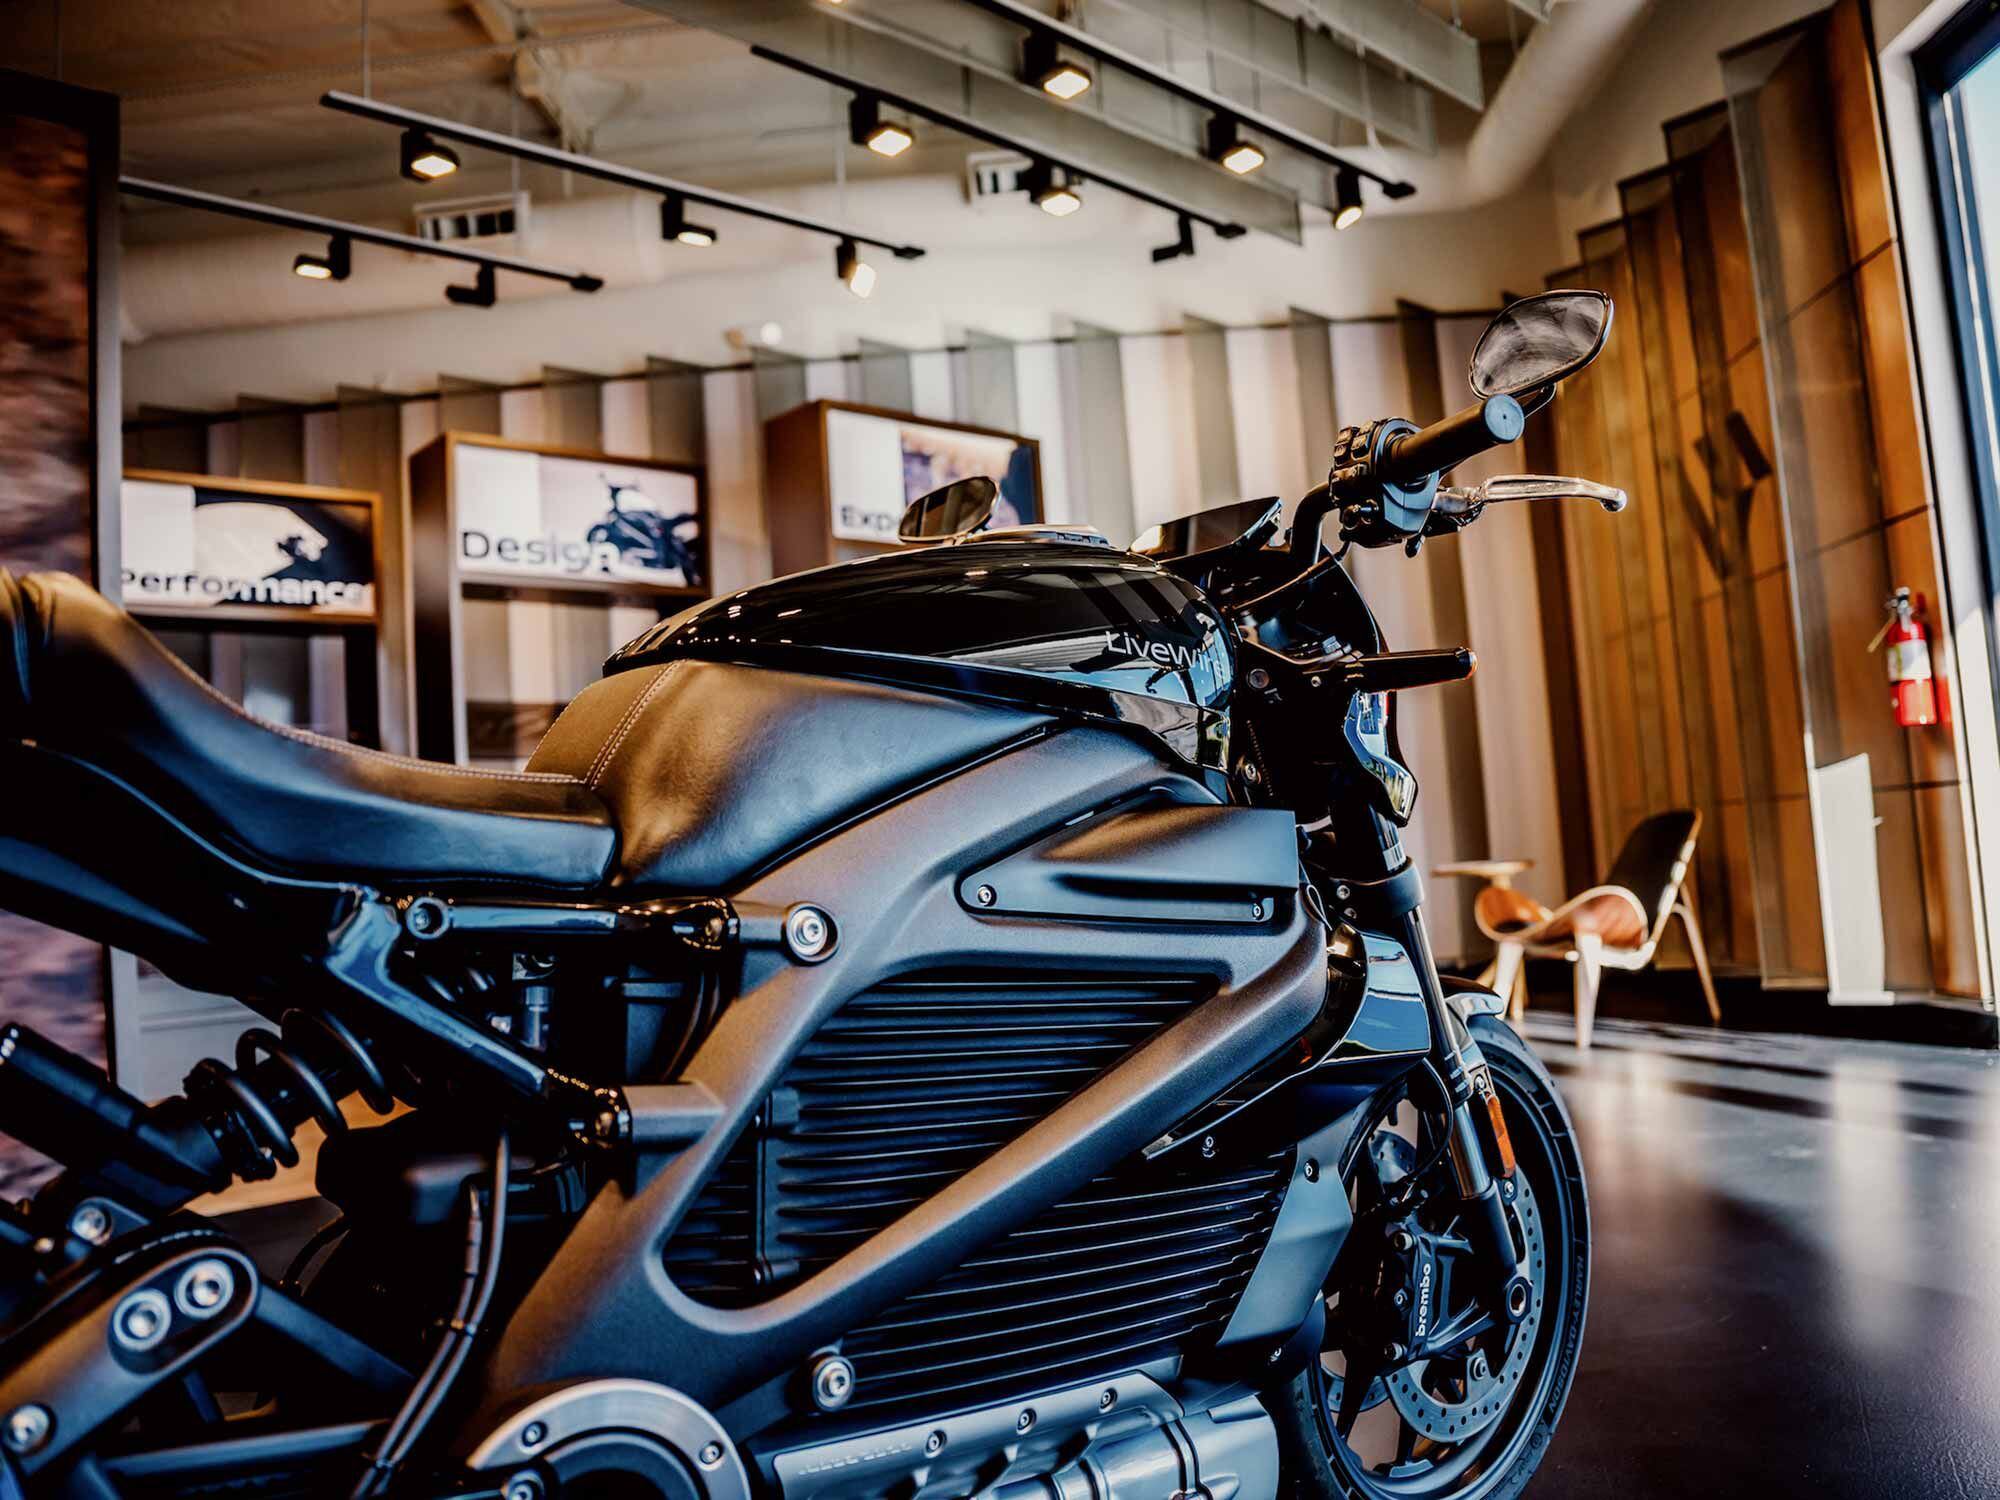 A look inside the Malibu LiveWire Experience Center that Harley debuted to unite EV riders.